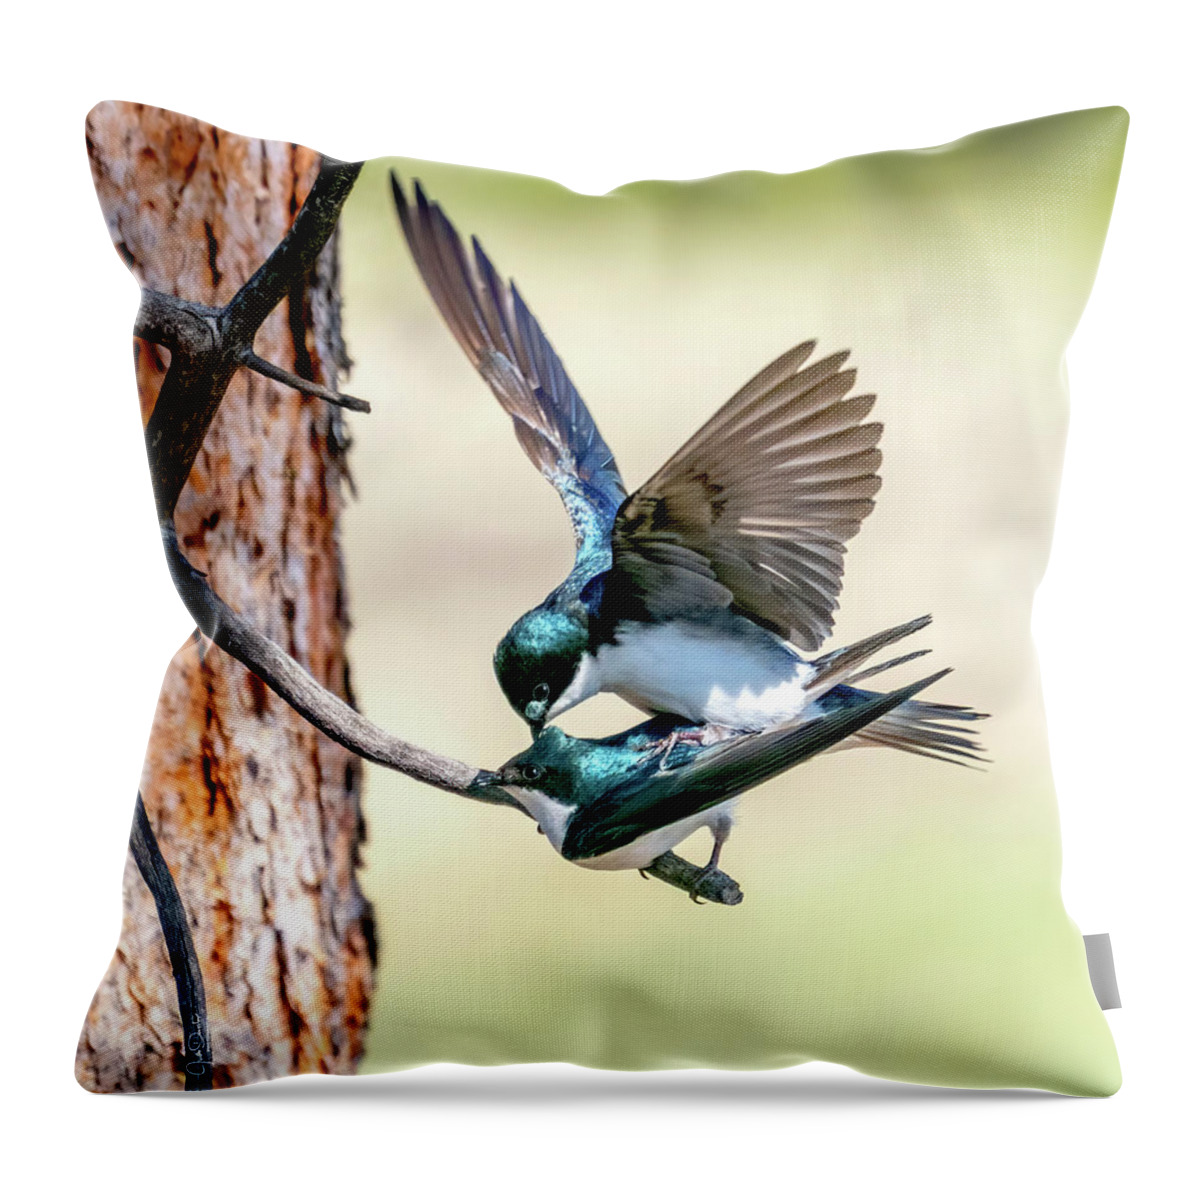 Tree Swallows Throw Pillow featuring the photograph Tree Swallow Love by Judi Dressler